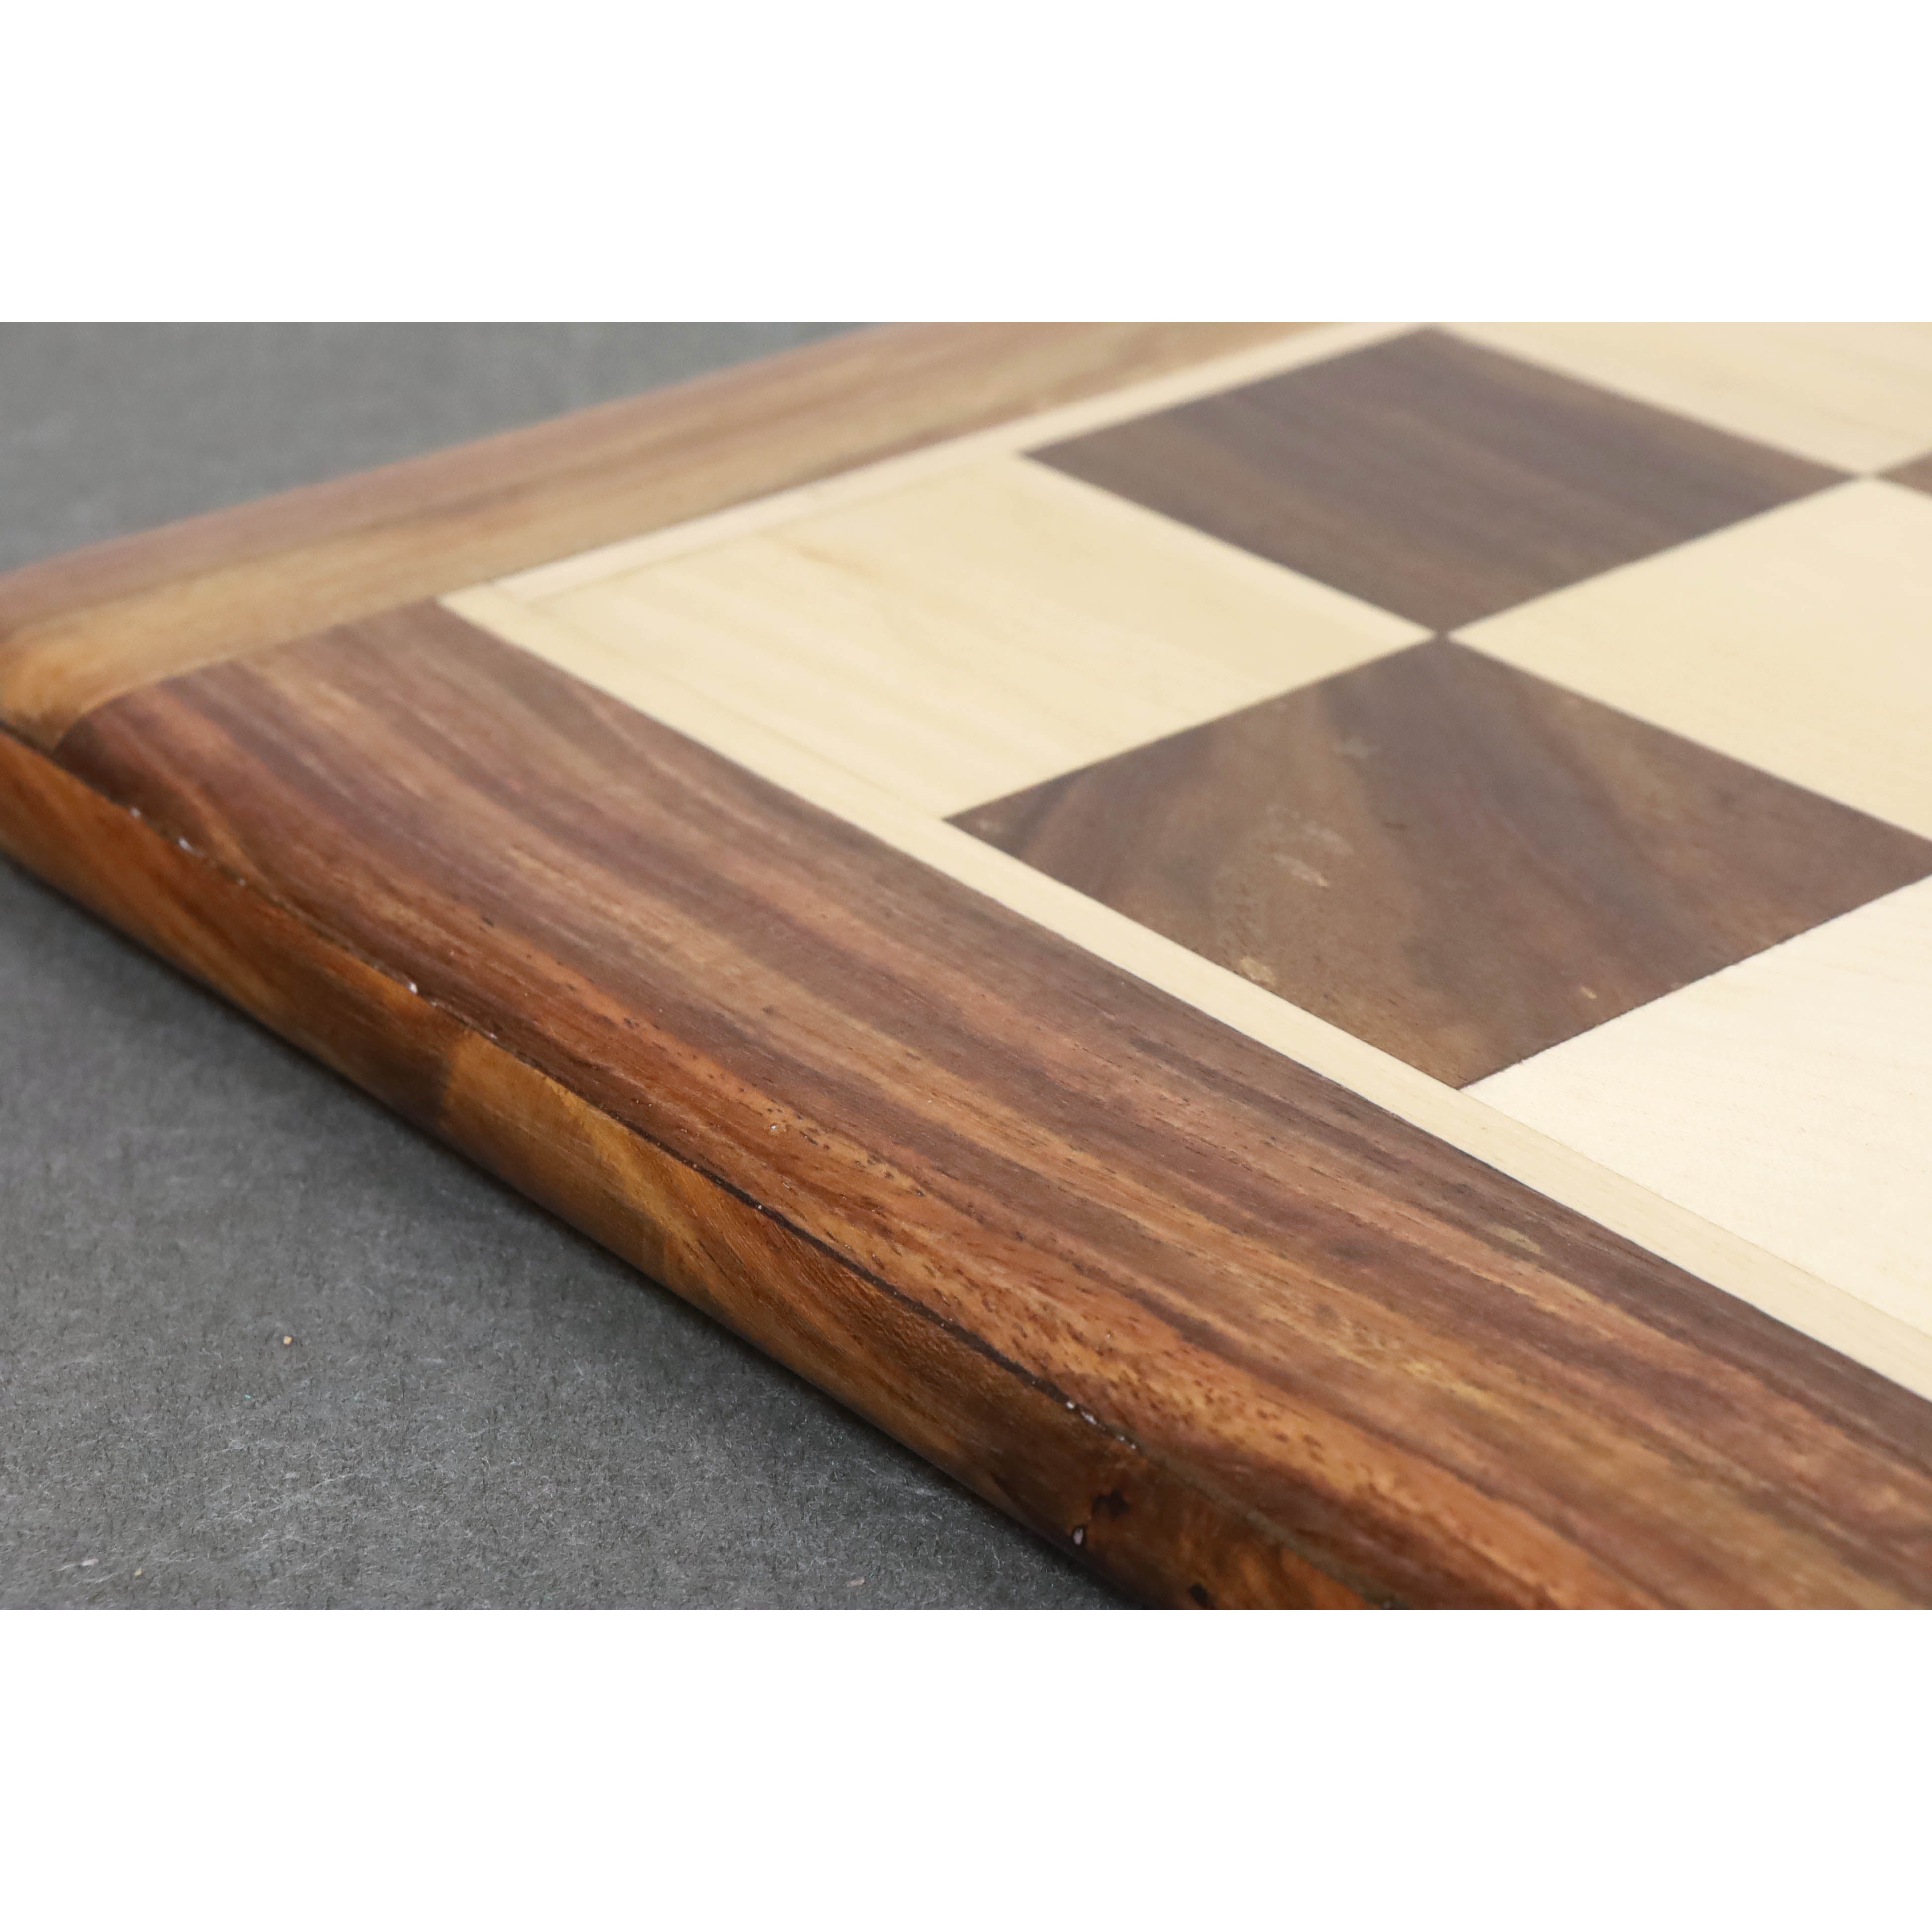 21 Solid Inlaid Ebony & Maple Wood Chess Board With Coordinates - 55 mm  Square